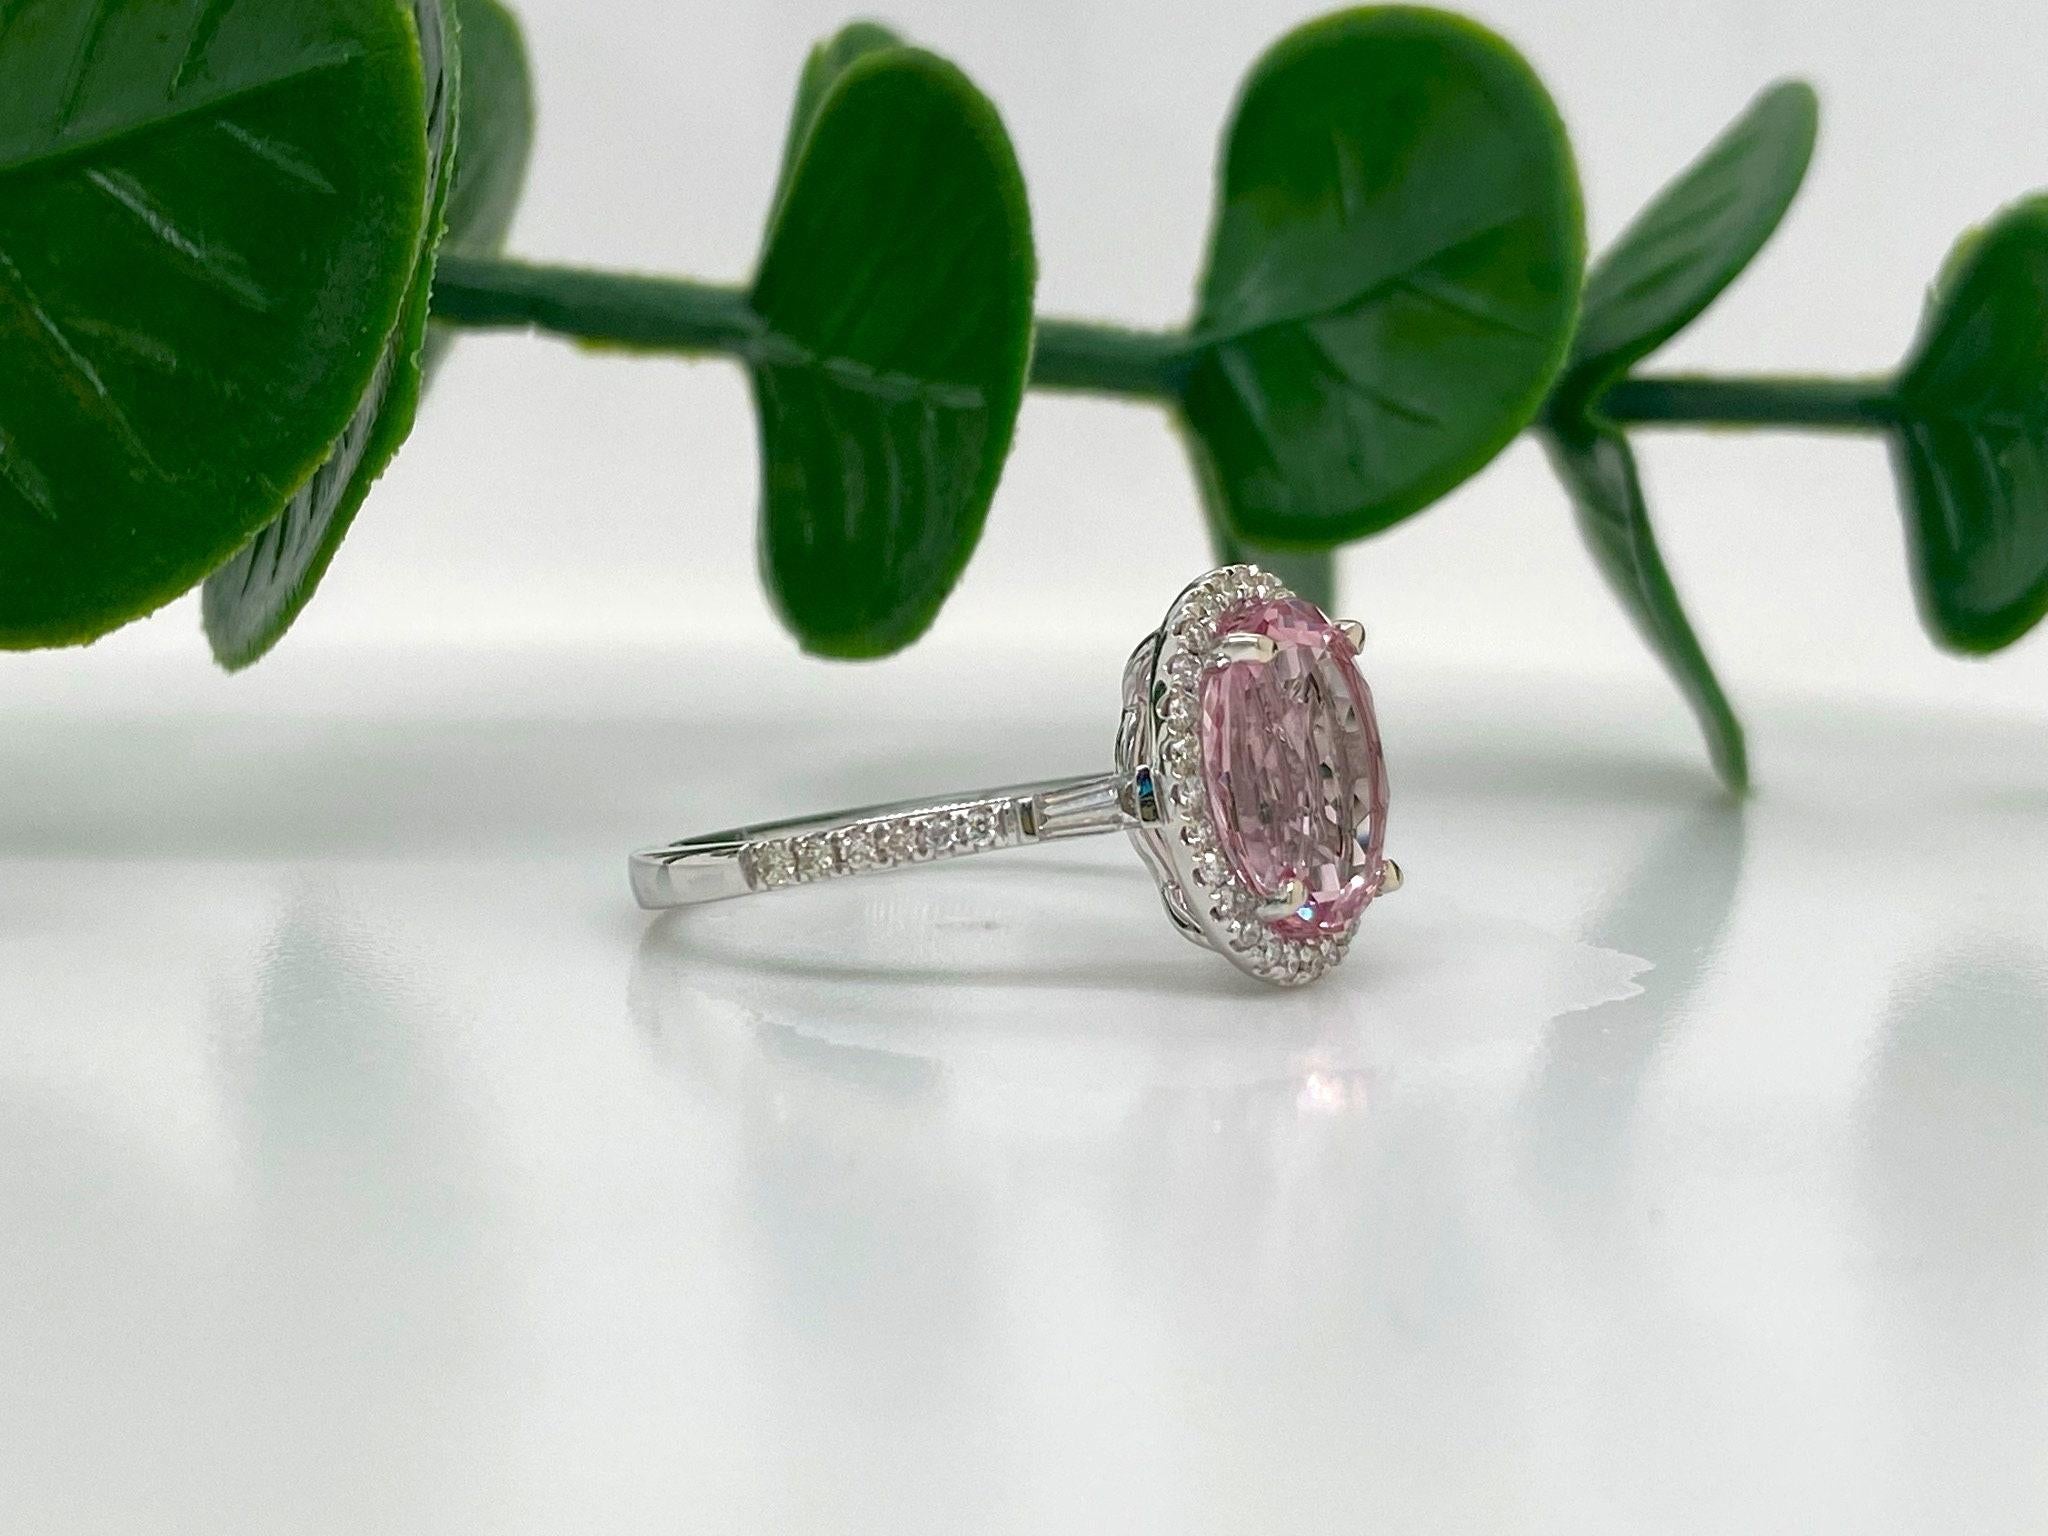 Pink and chic is the best way to describe this ring - the combination of diamonds and pink morganite allow for an effortless look!

Specifications:

Center Stone: Morganite
Size: 10x8mm
Weight: 1.8cts

Metal: 14k Solid/2.76g
Diamonds S/I GH: